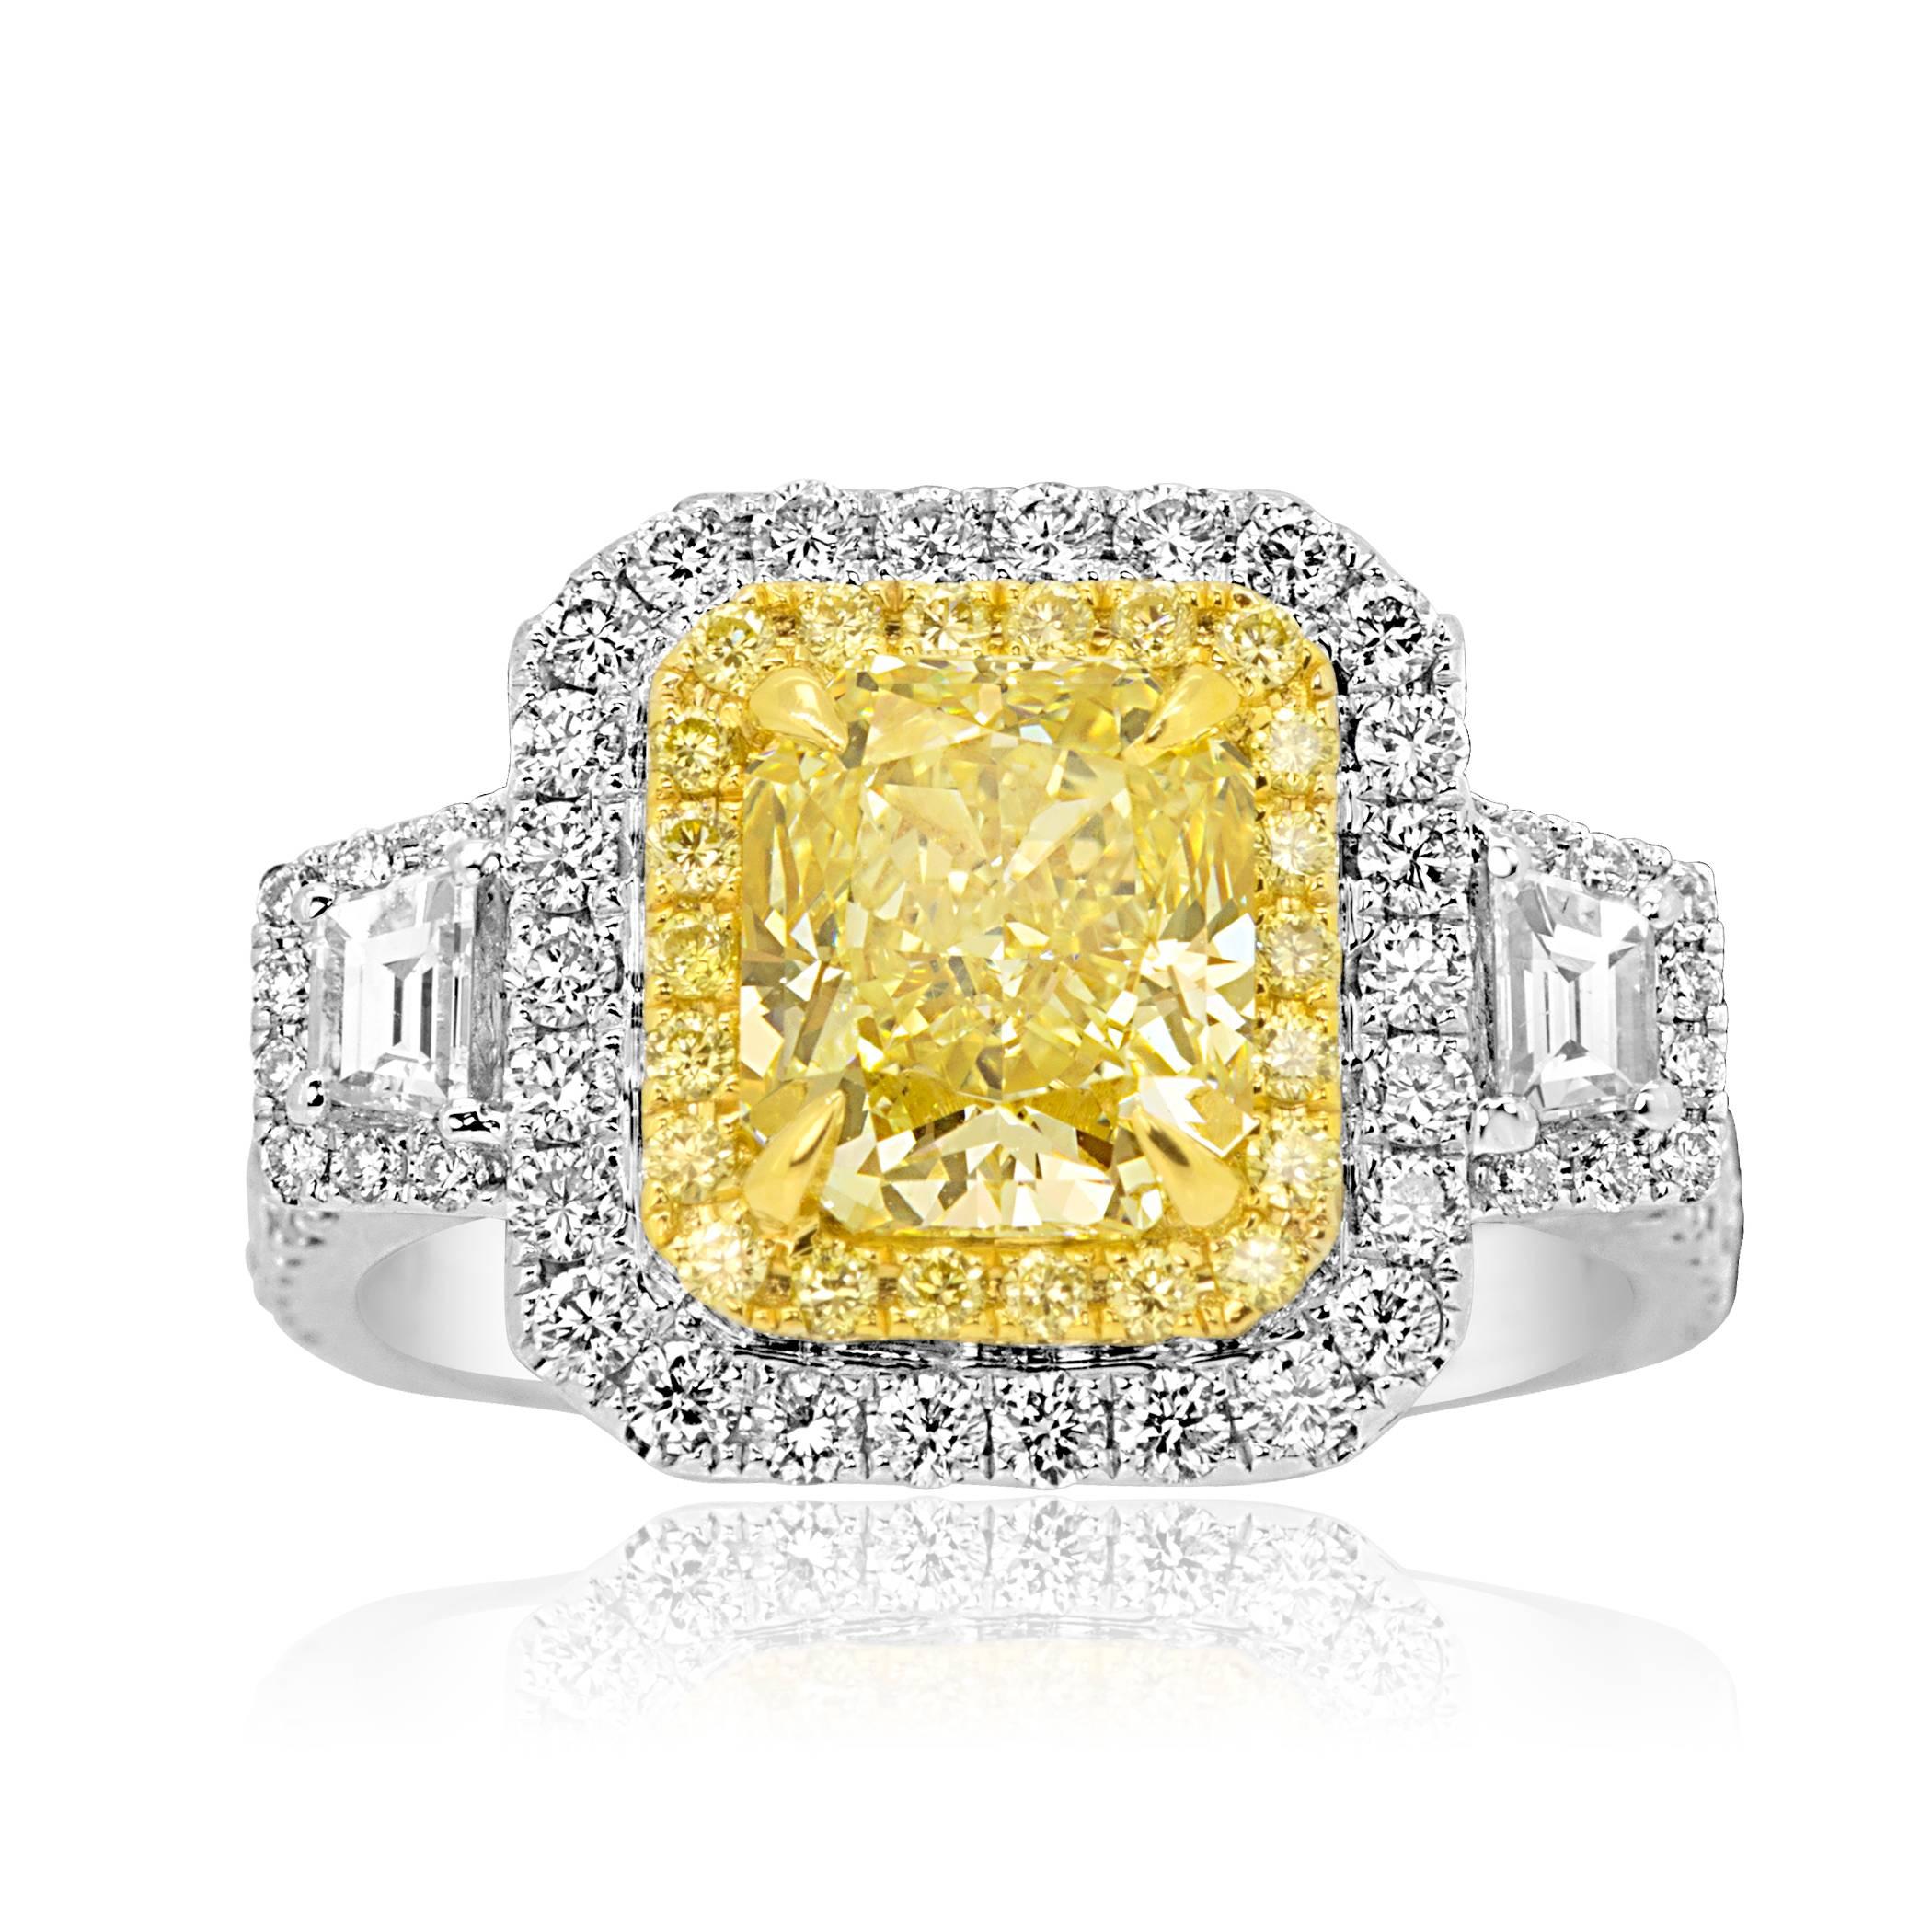 Stunning GIA certified 2.04 Carat VVS1 Radiant Cut Fancy Light Yellow Center Encircled in Double Halo of Natural Fancy Yellow Diamonds VS-SI clarity 0.32 Carat and White G-H Color VS-SI Clarity Diamond 1.14 Carat Flanked by Two White Diamond